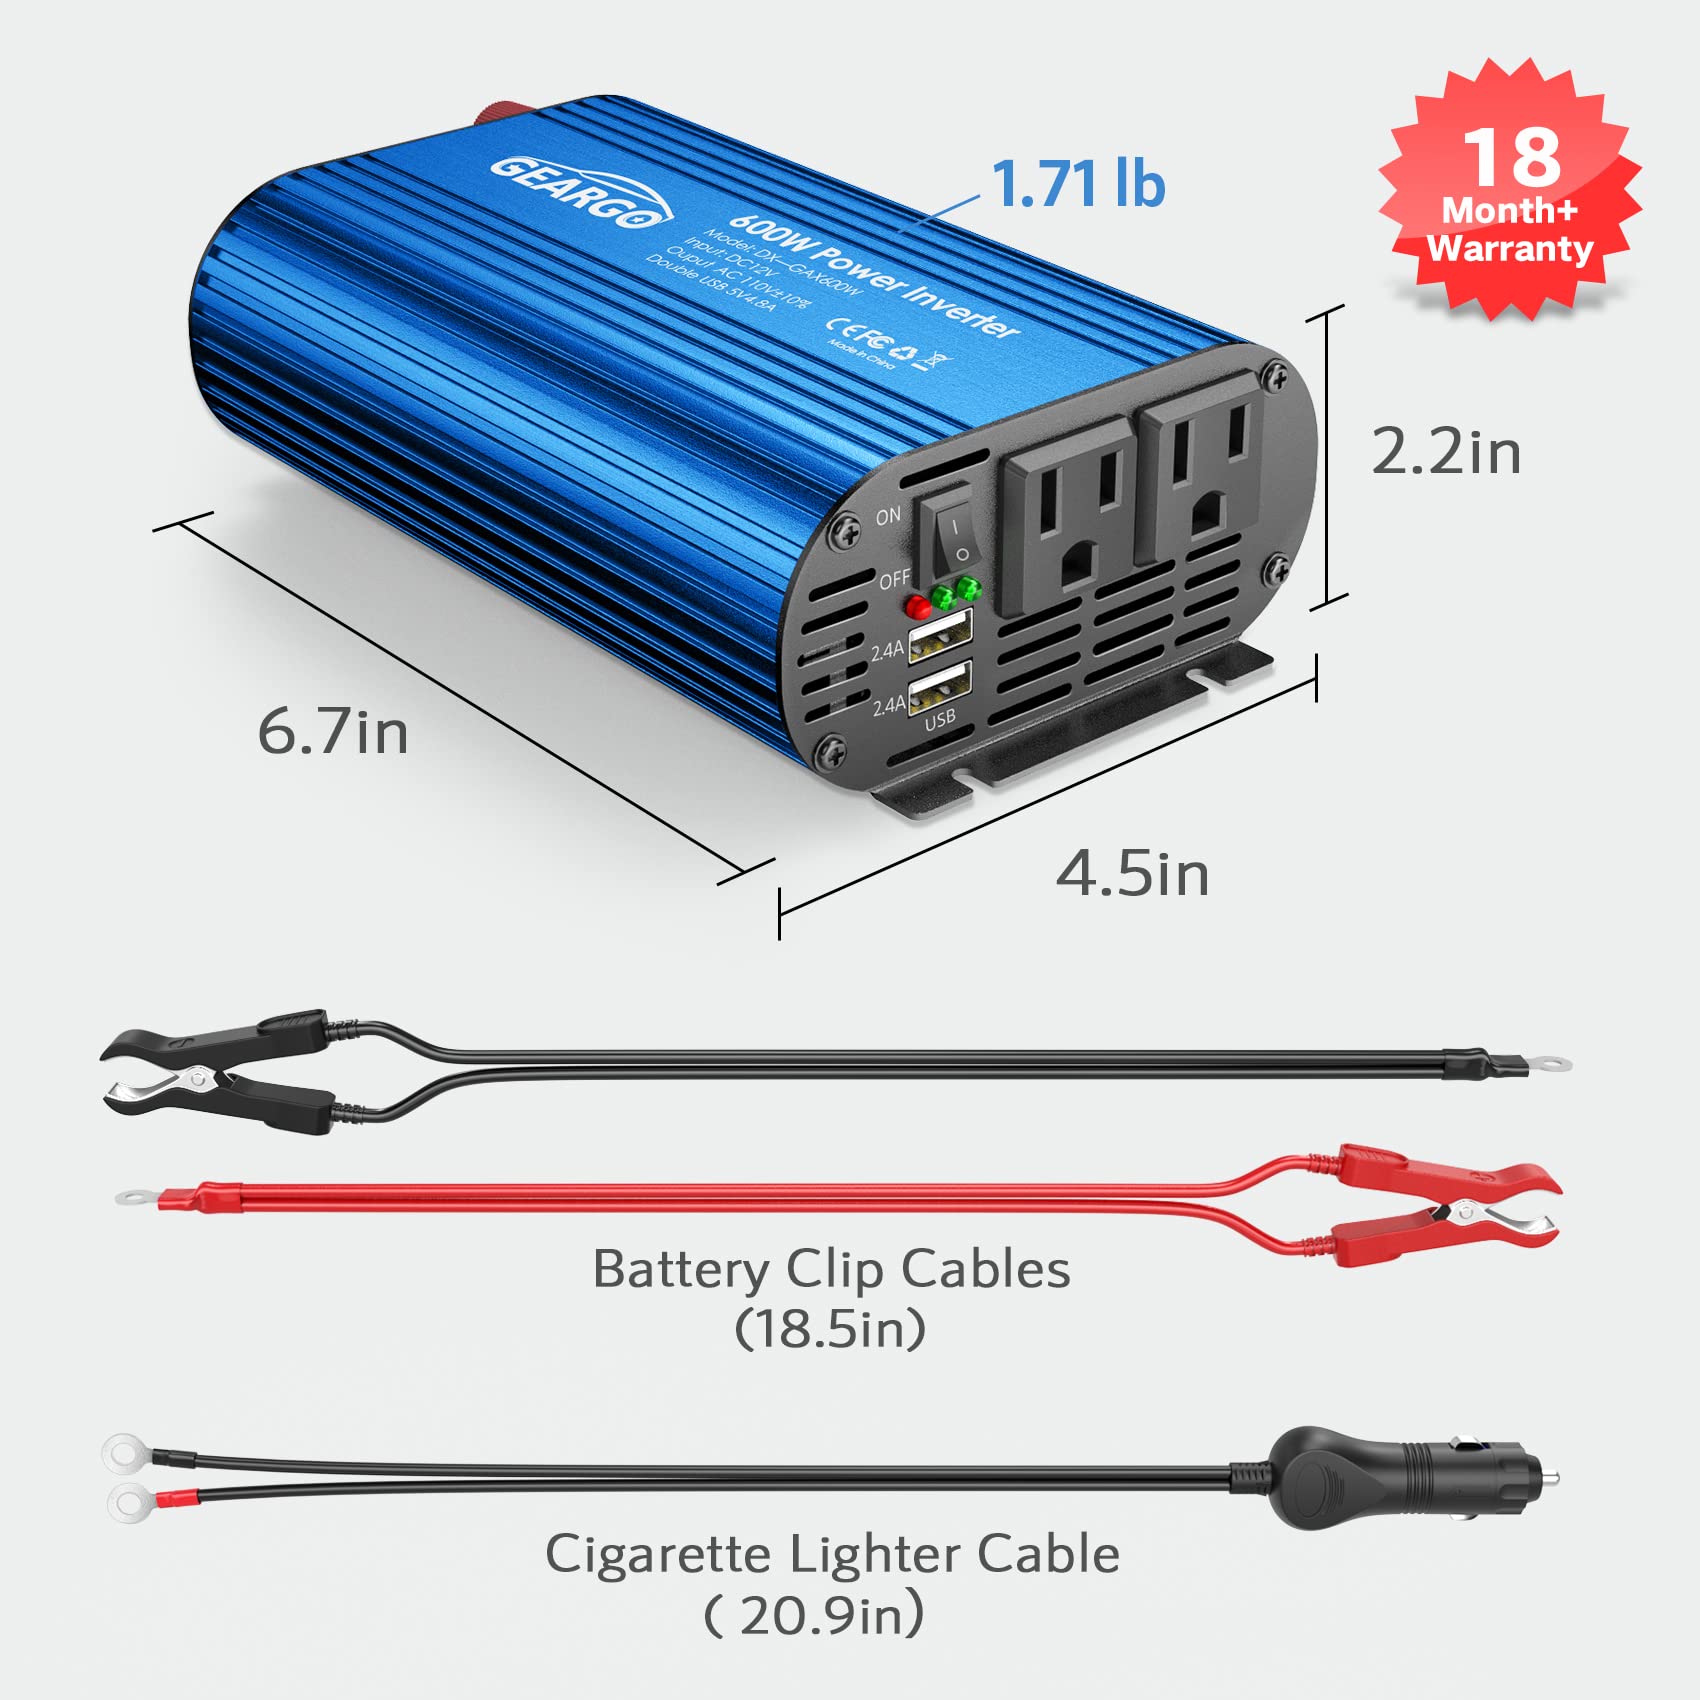 GEARGO 600W Car Power Inverter DC 12V to 110V with 4.8A Dual USB Ports and 2 AC Outlets 12V Power Inverters for Vehicles （Blue）